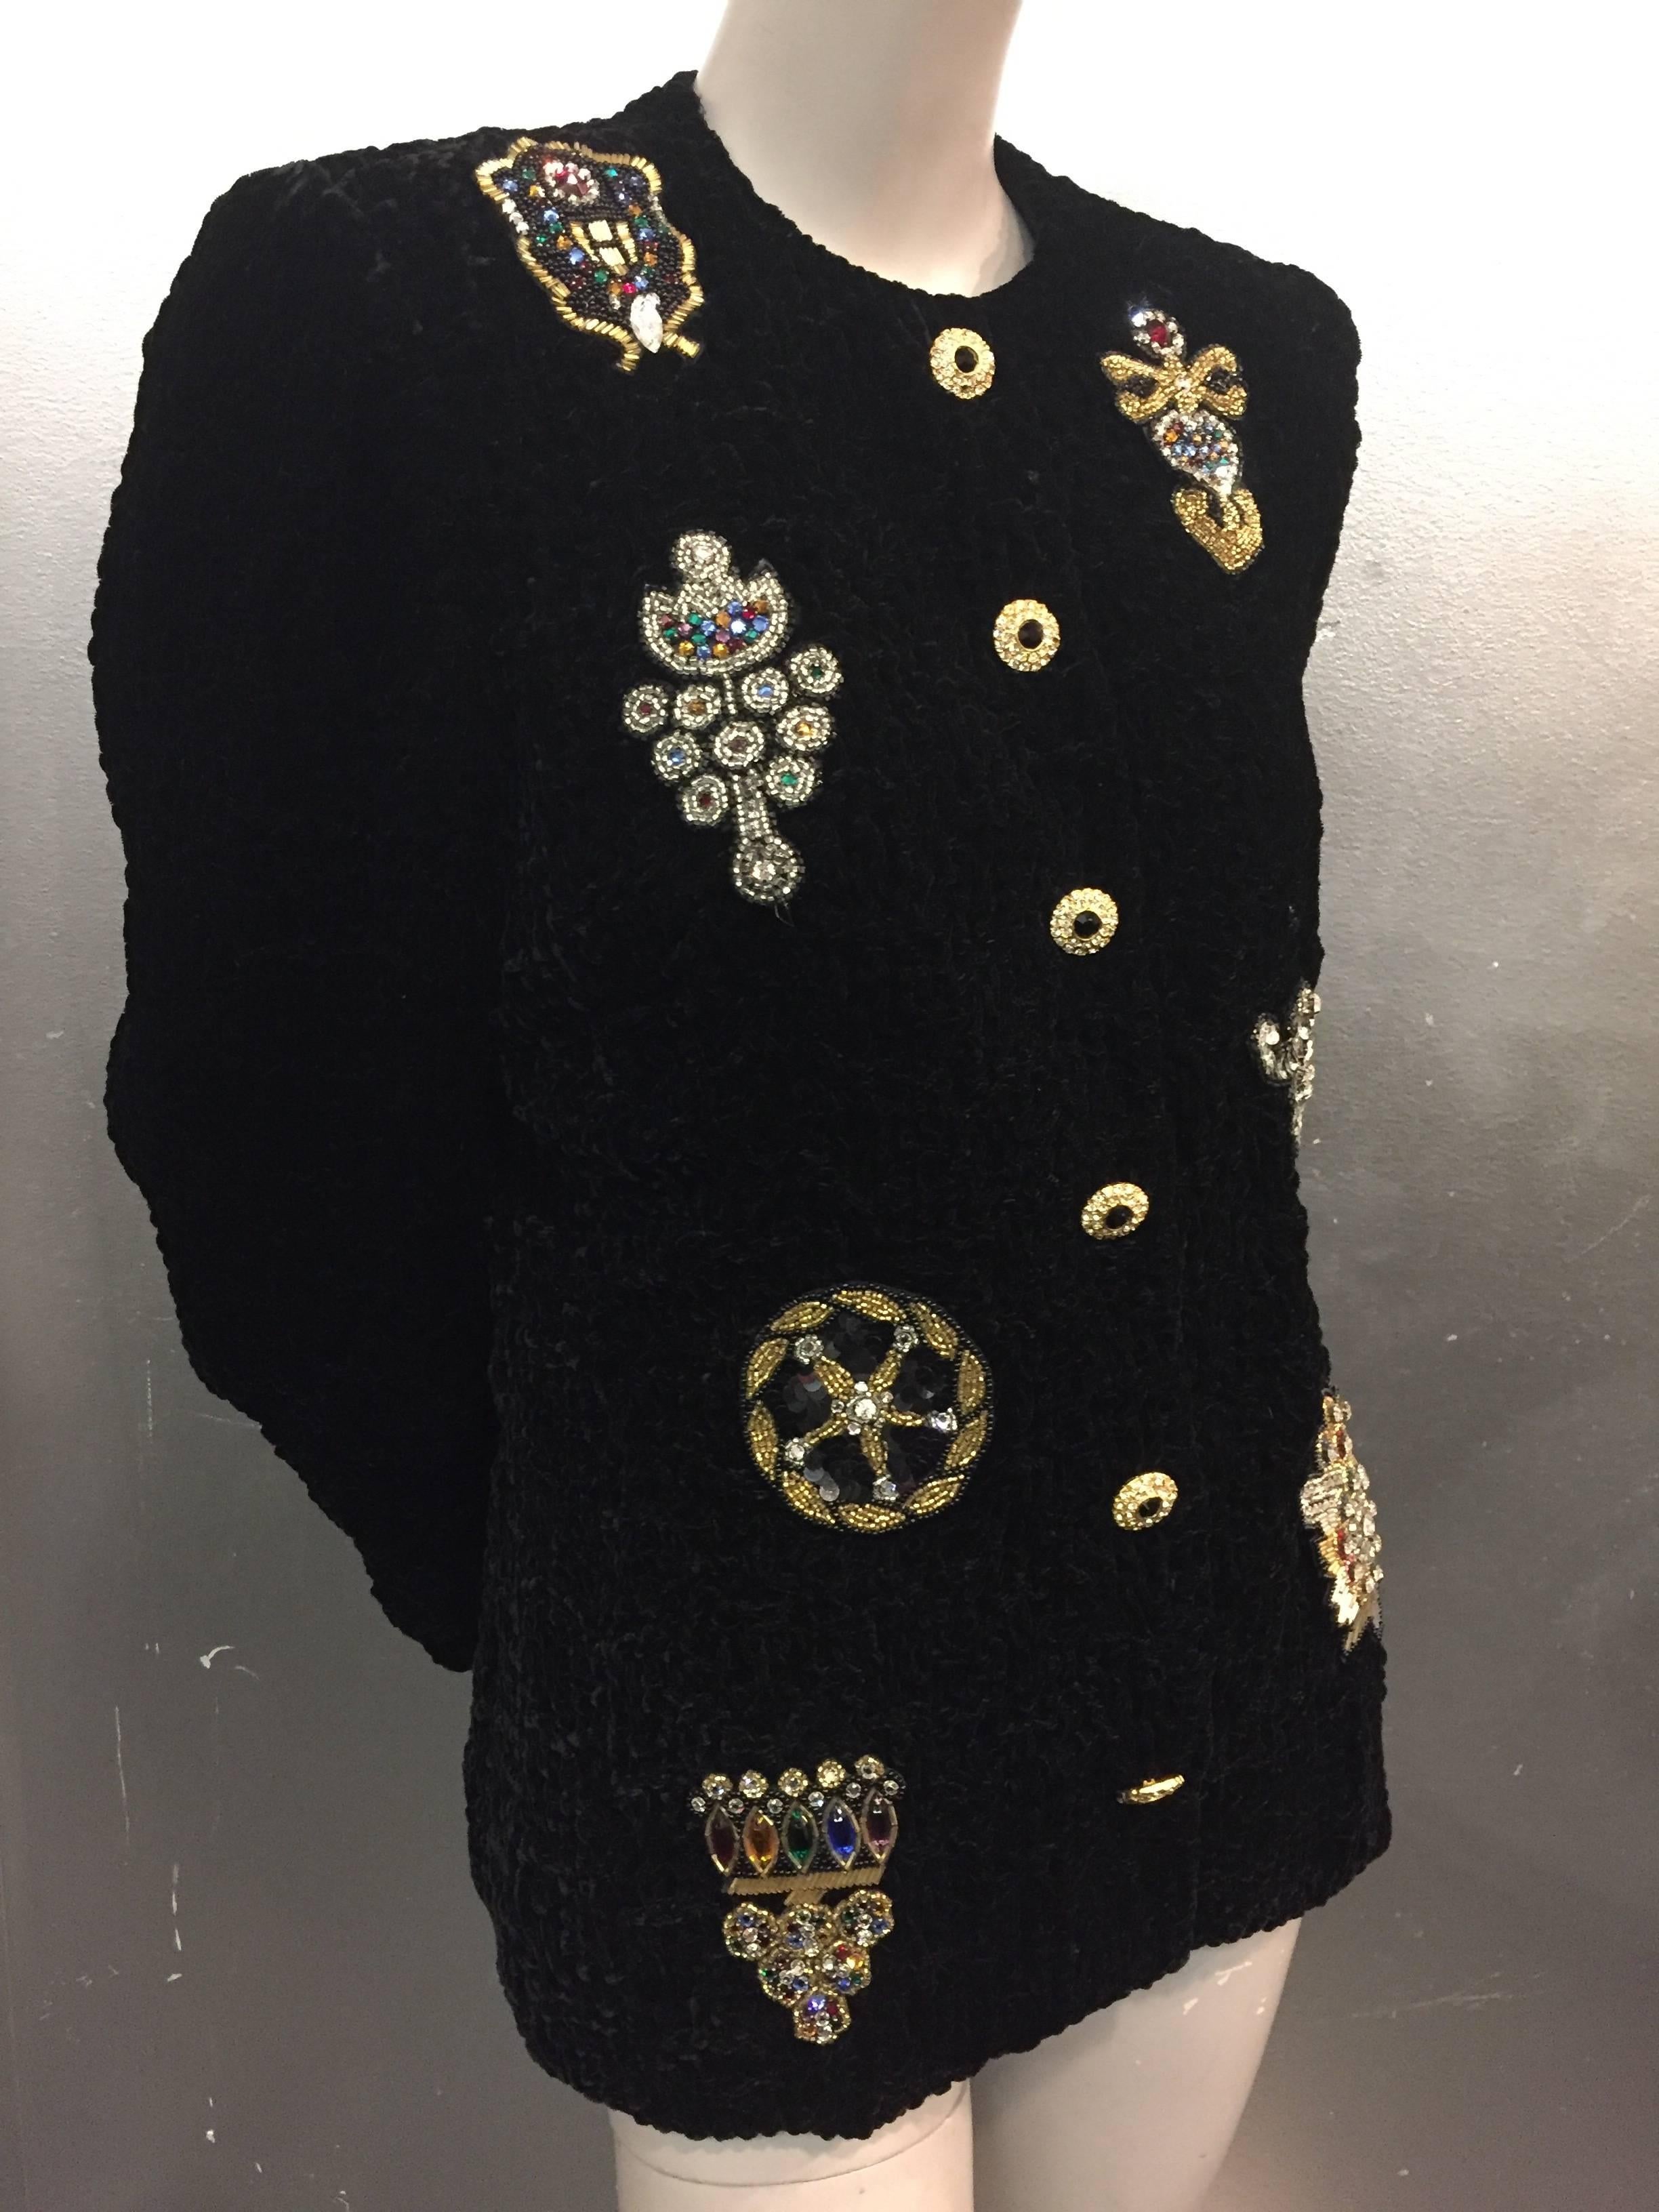 A fabulous 1980s black ruched velvet evening jacket with front snap closures and rhinestone buttons on top.  8 large beaded and sequined medallion appliqués embellish the front. 